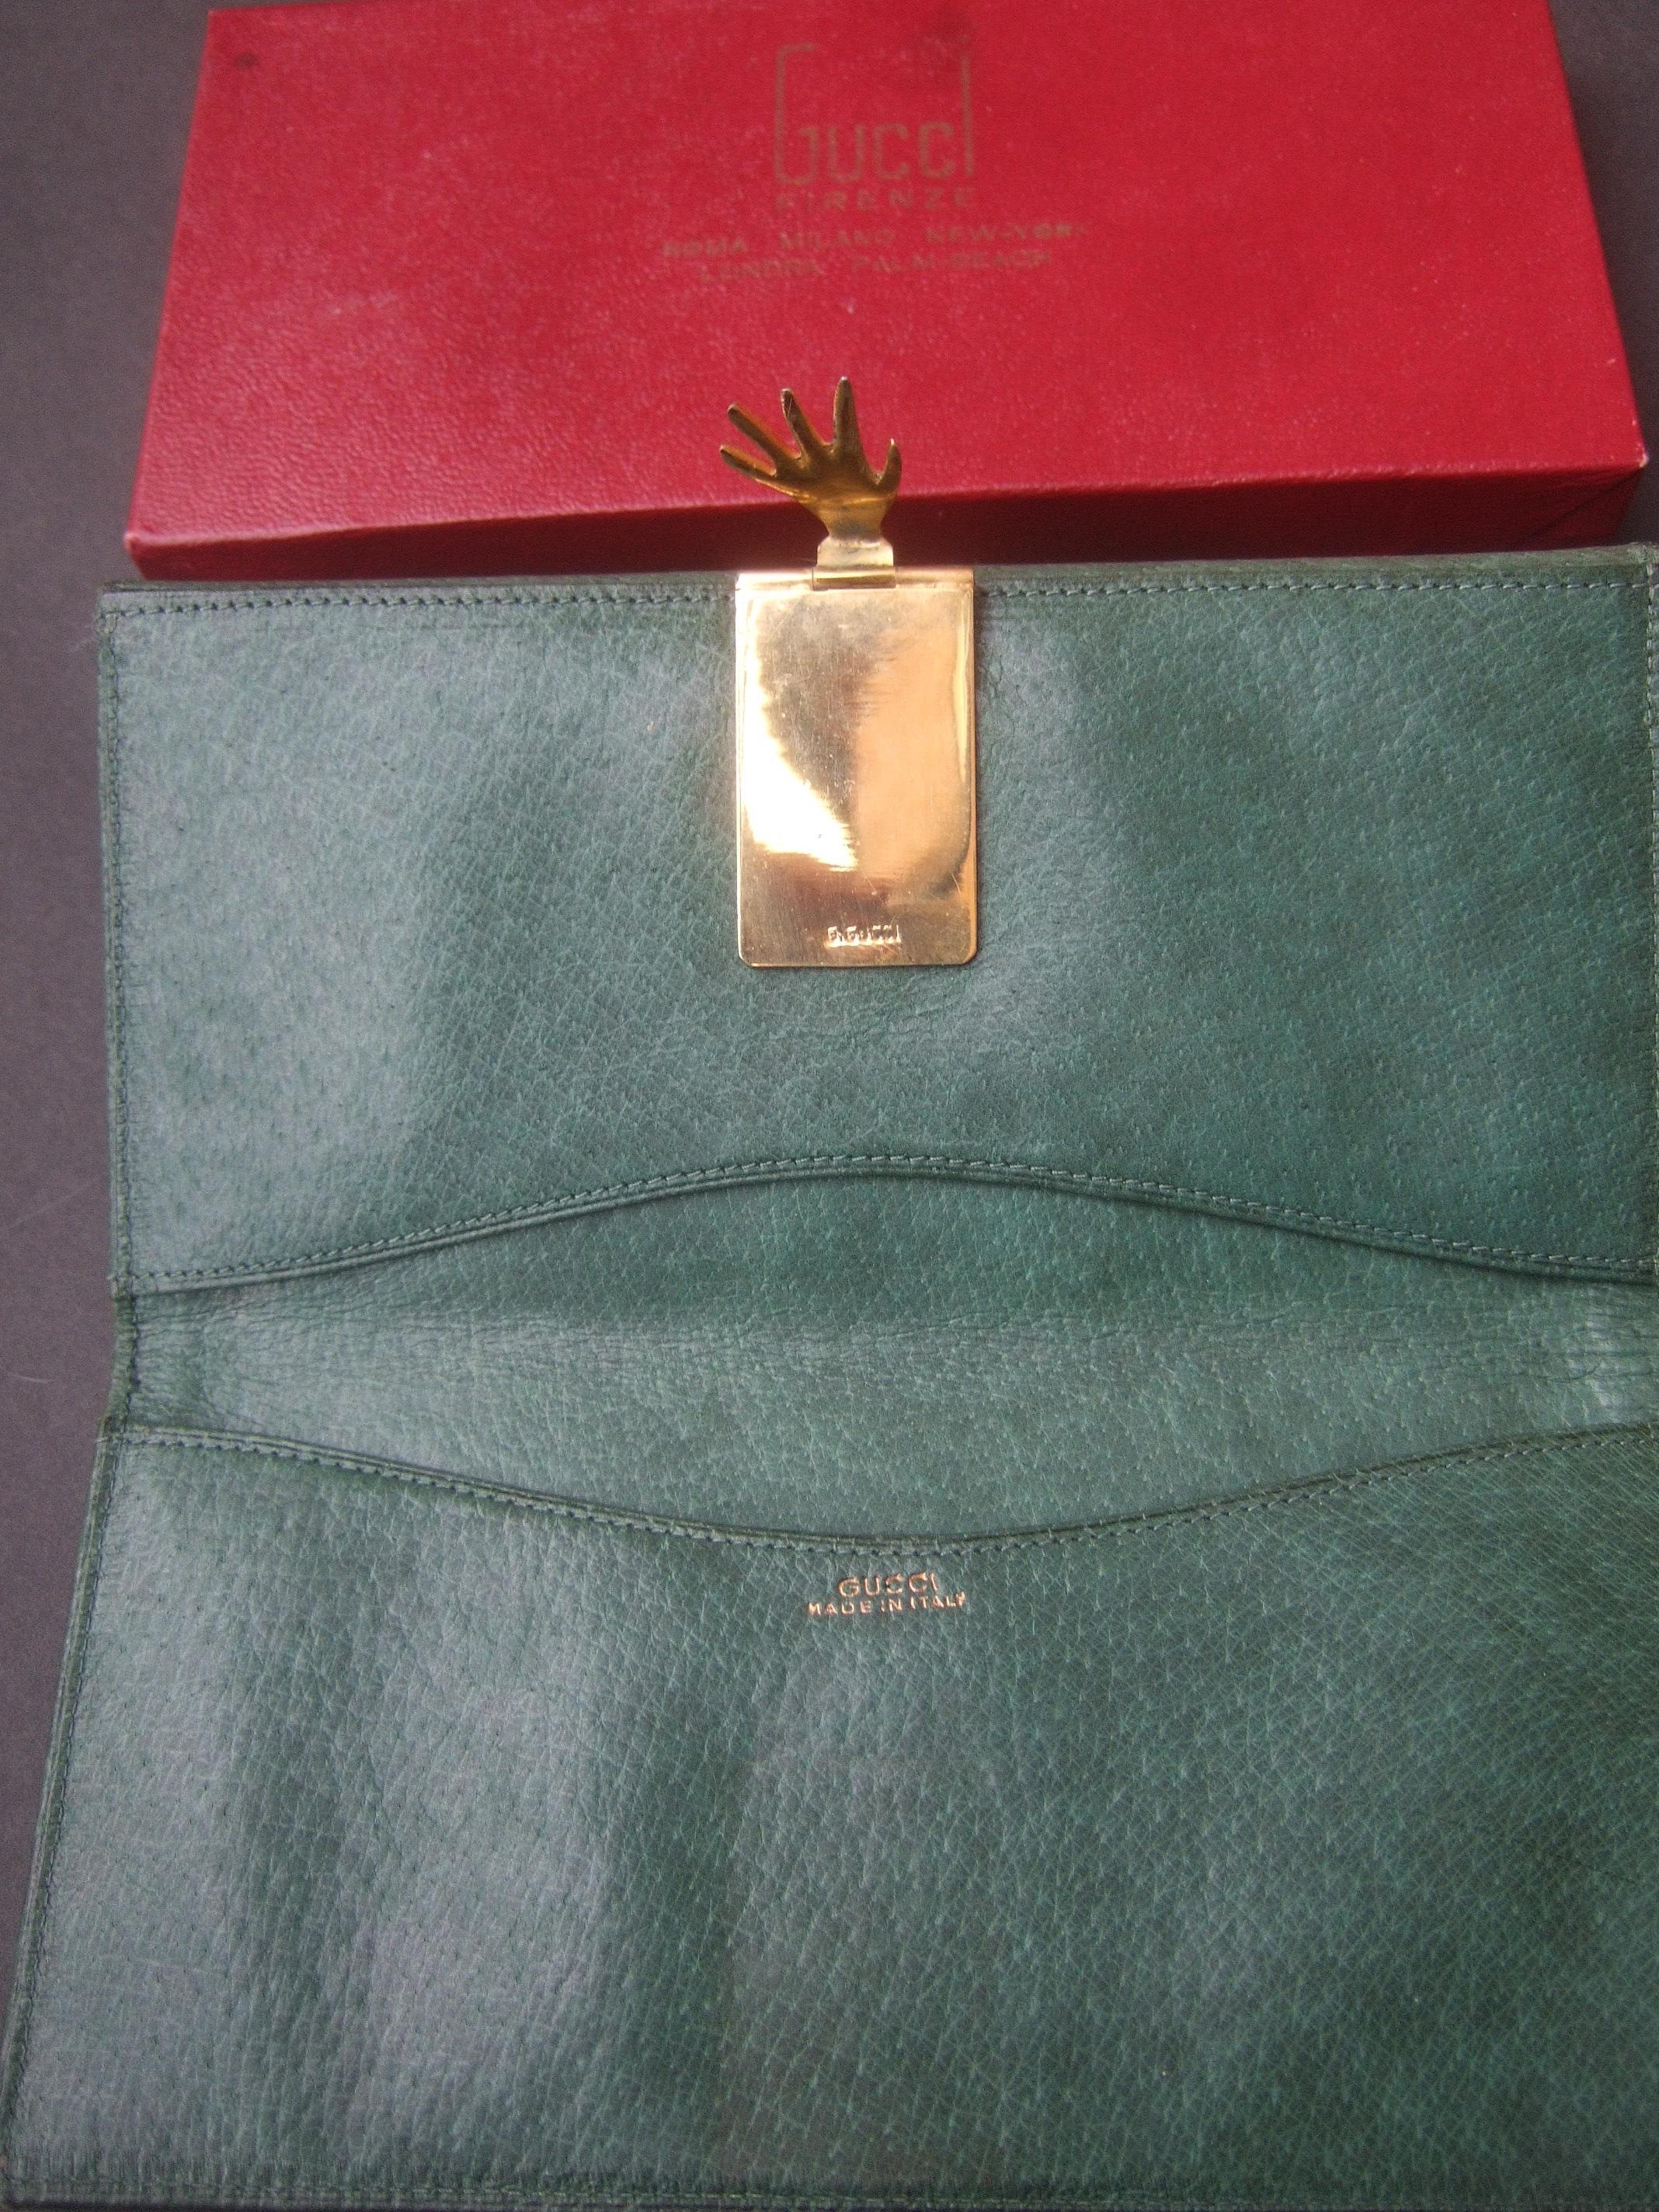 Women's Gucci Italy Green Leather Hand Clasp Wallet in Gucci Presentation Box c 1970s